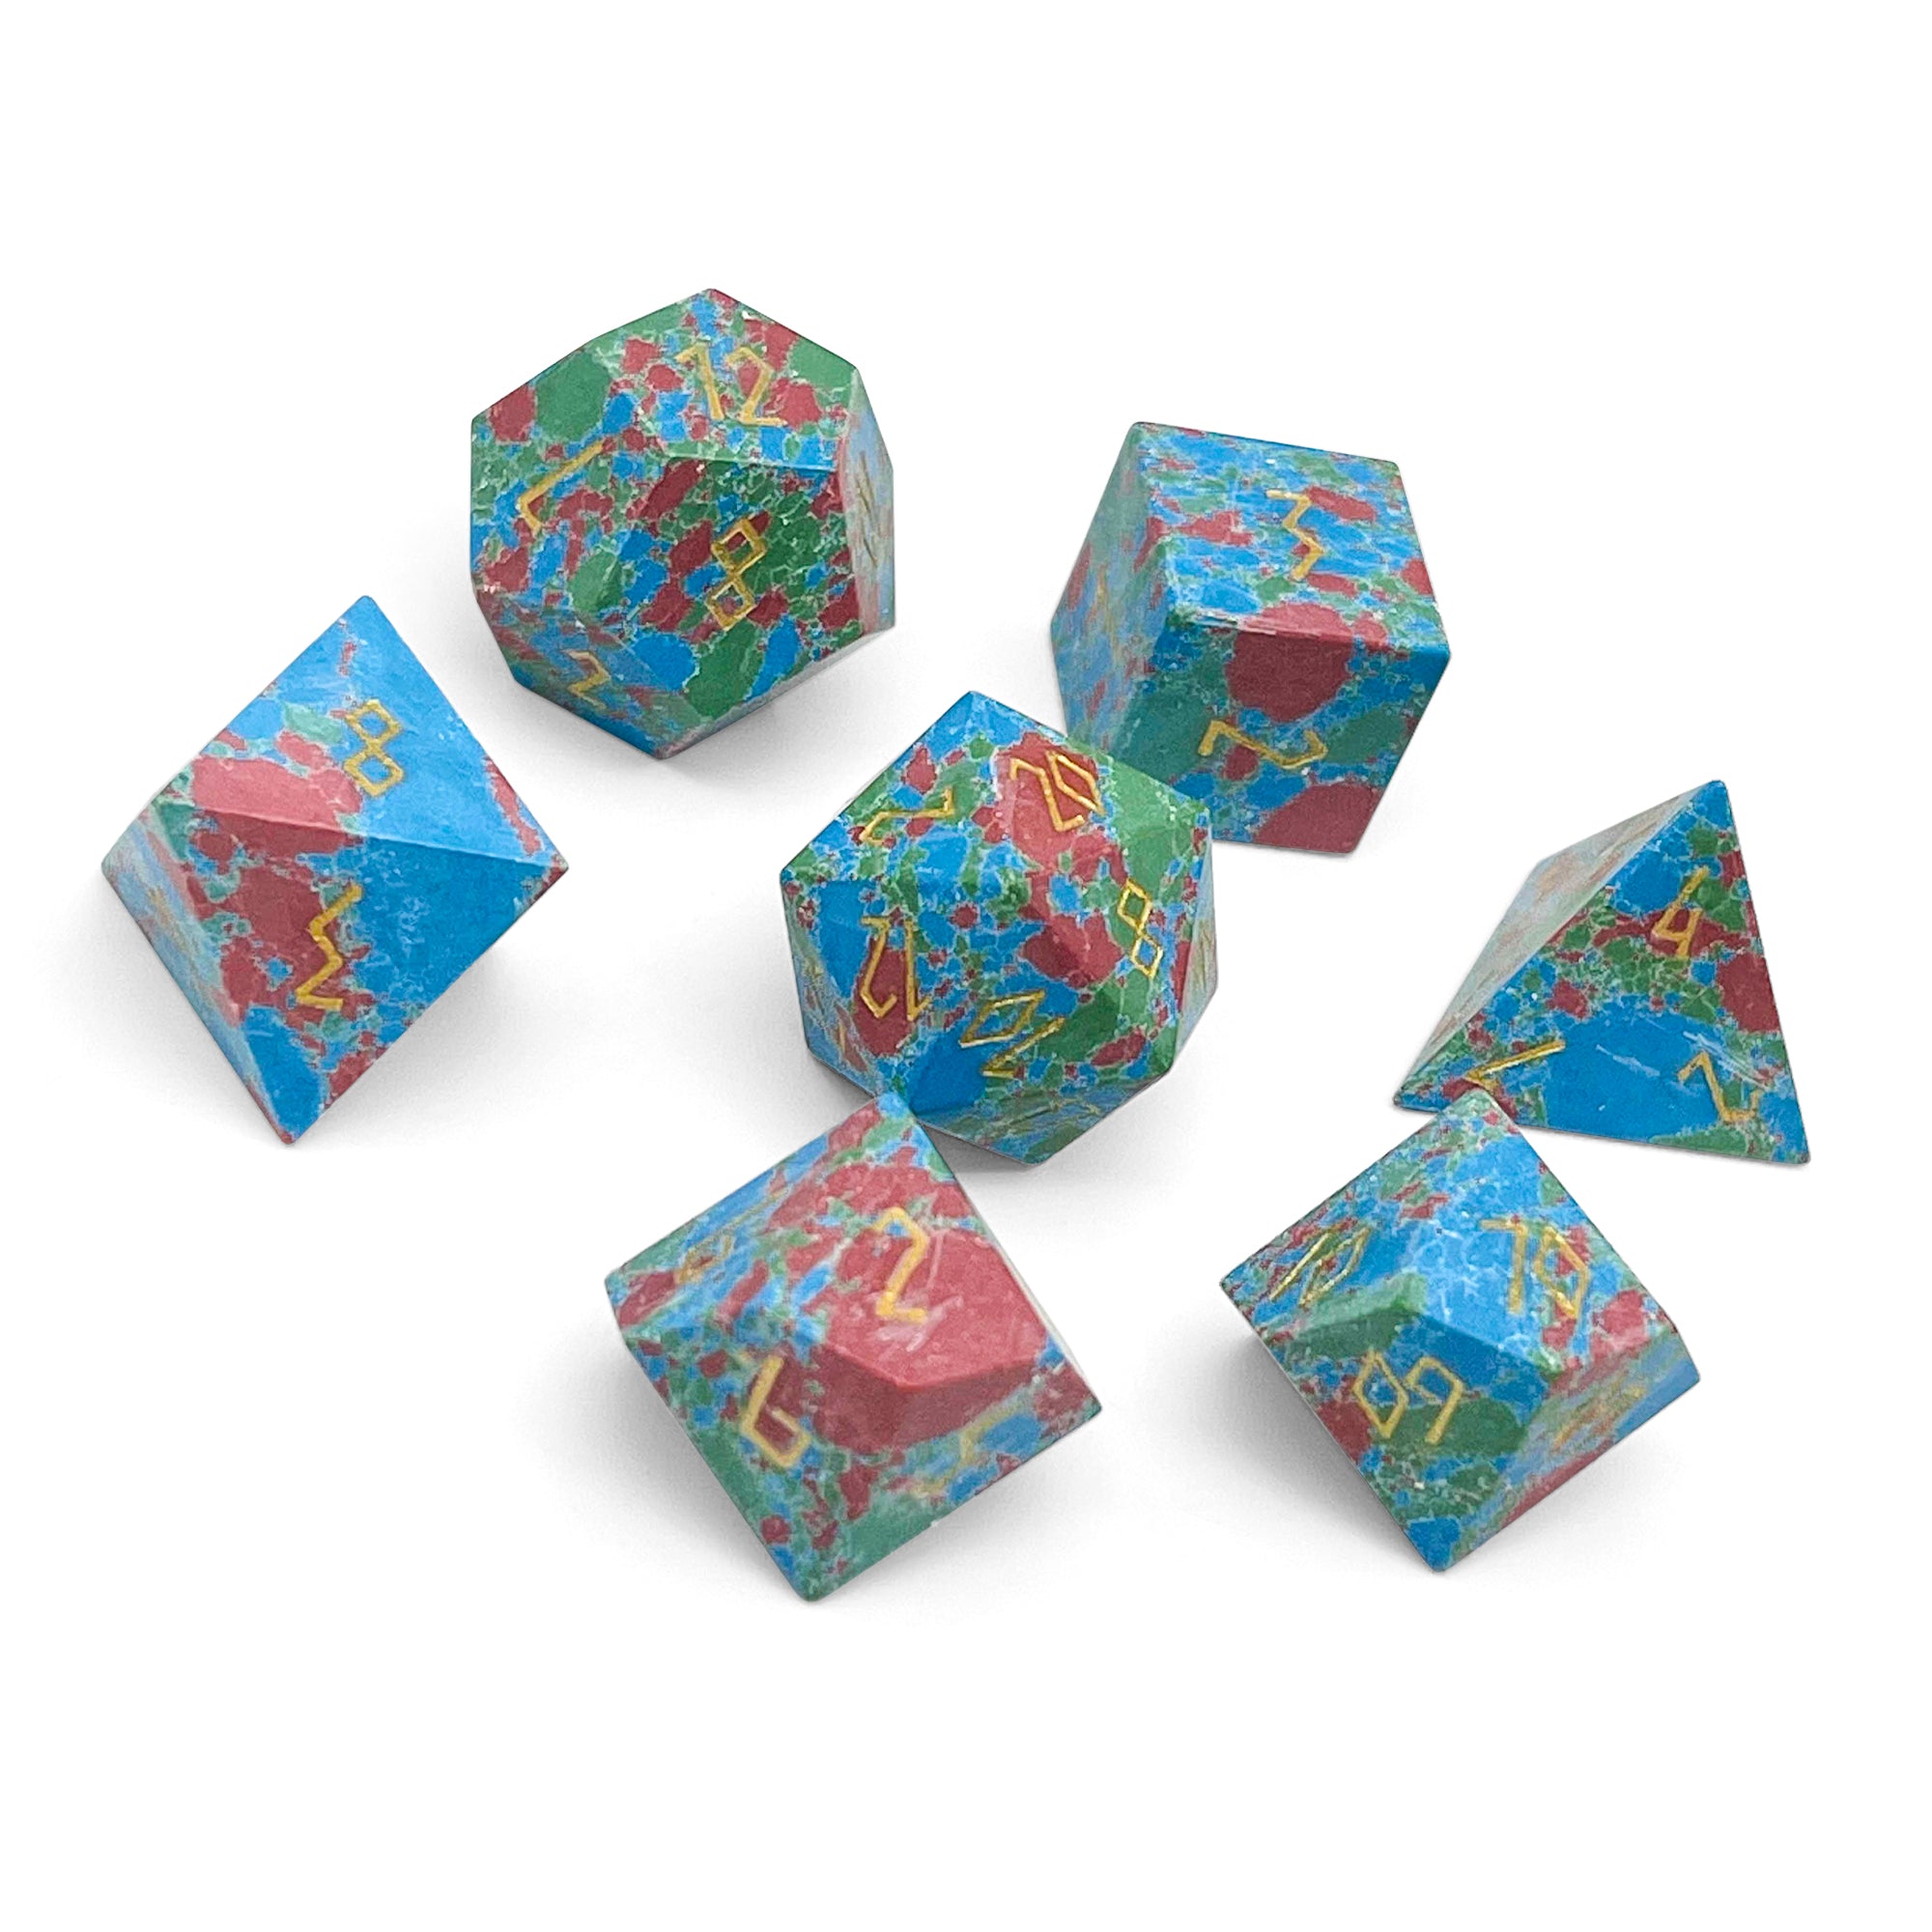 Red, Green, and Blue Splotted Turquoise - 7 Piece RPG Set TruStone Dice